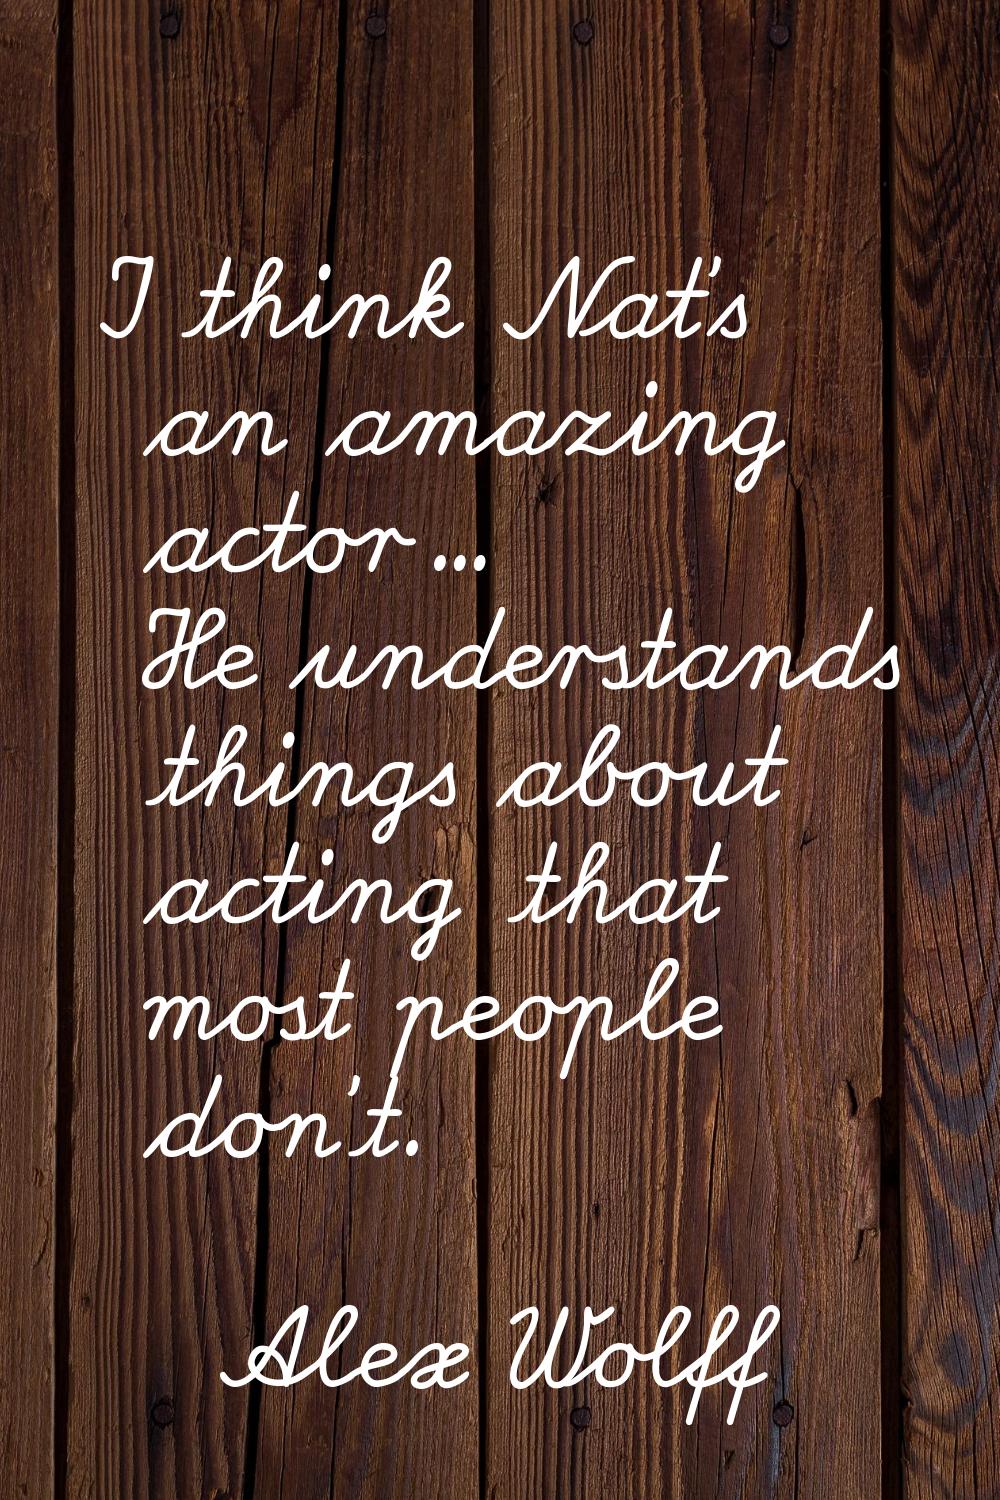 I think Nat's an amazing actor... He understands things about acting that most people don't.